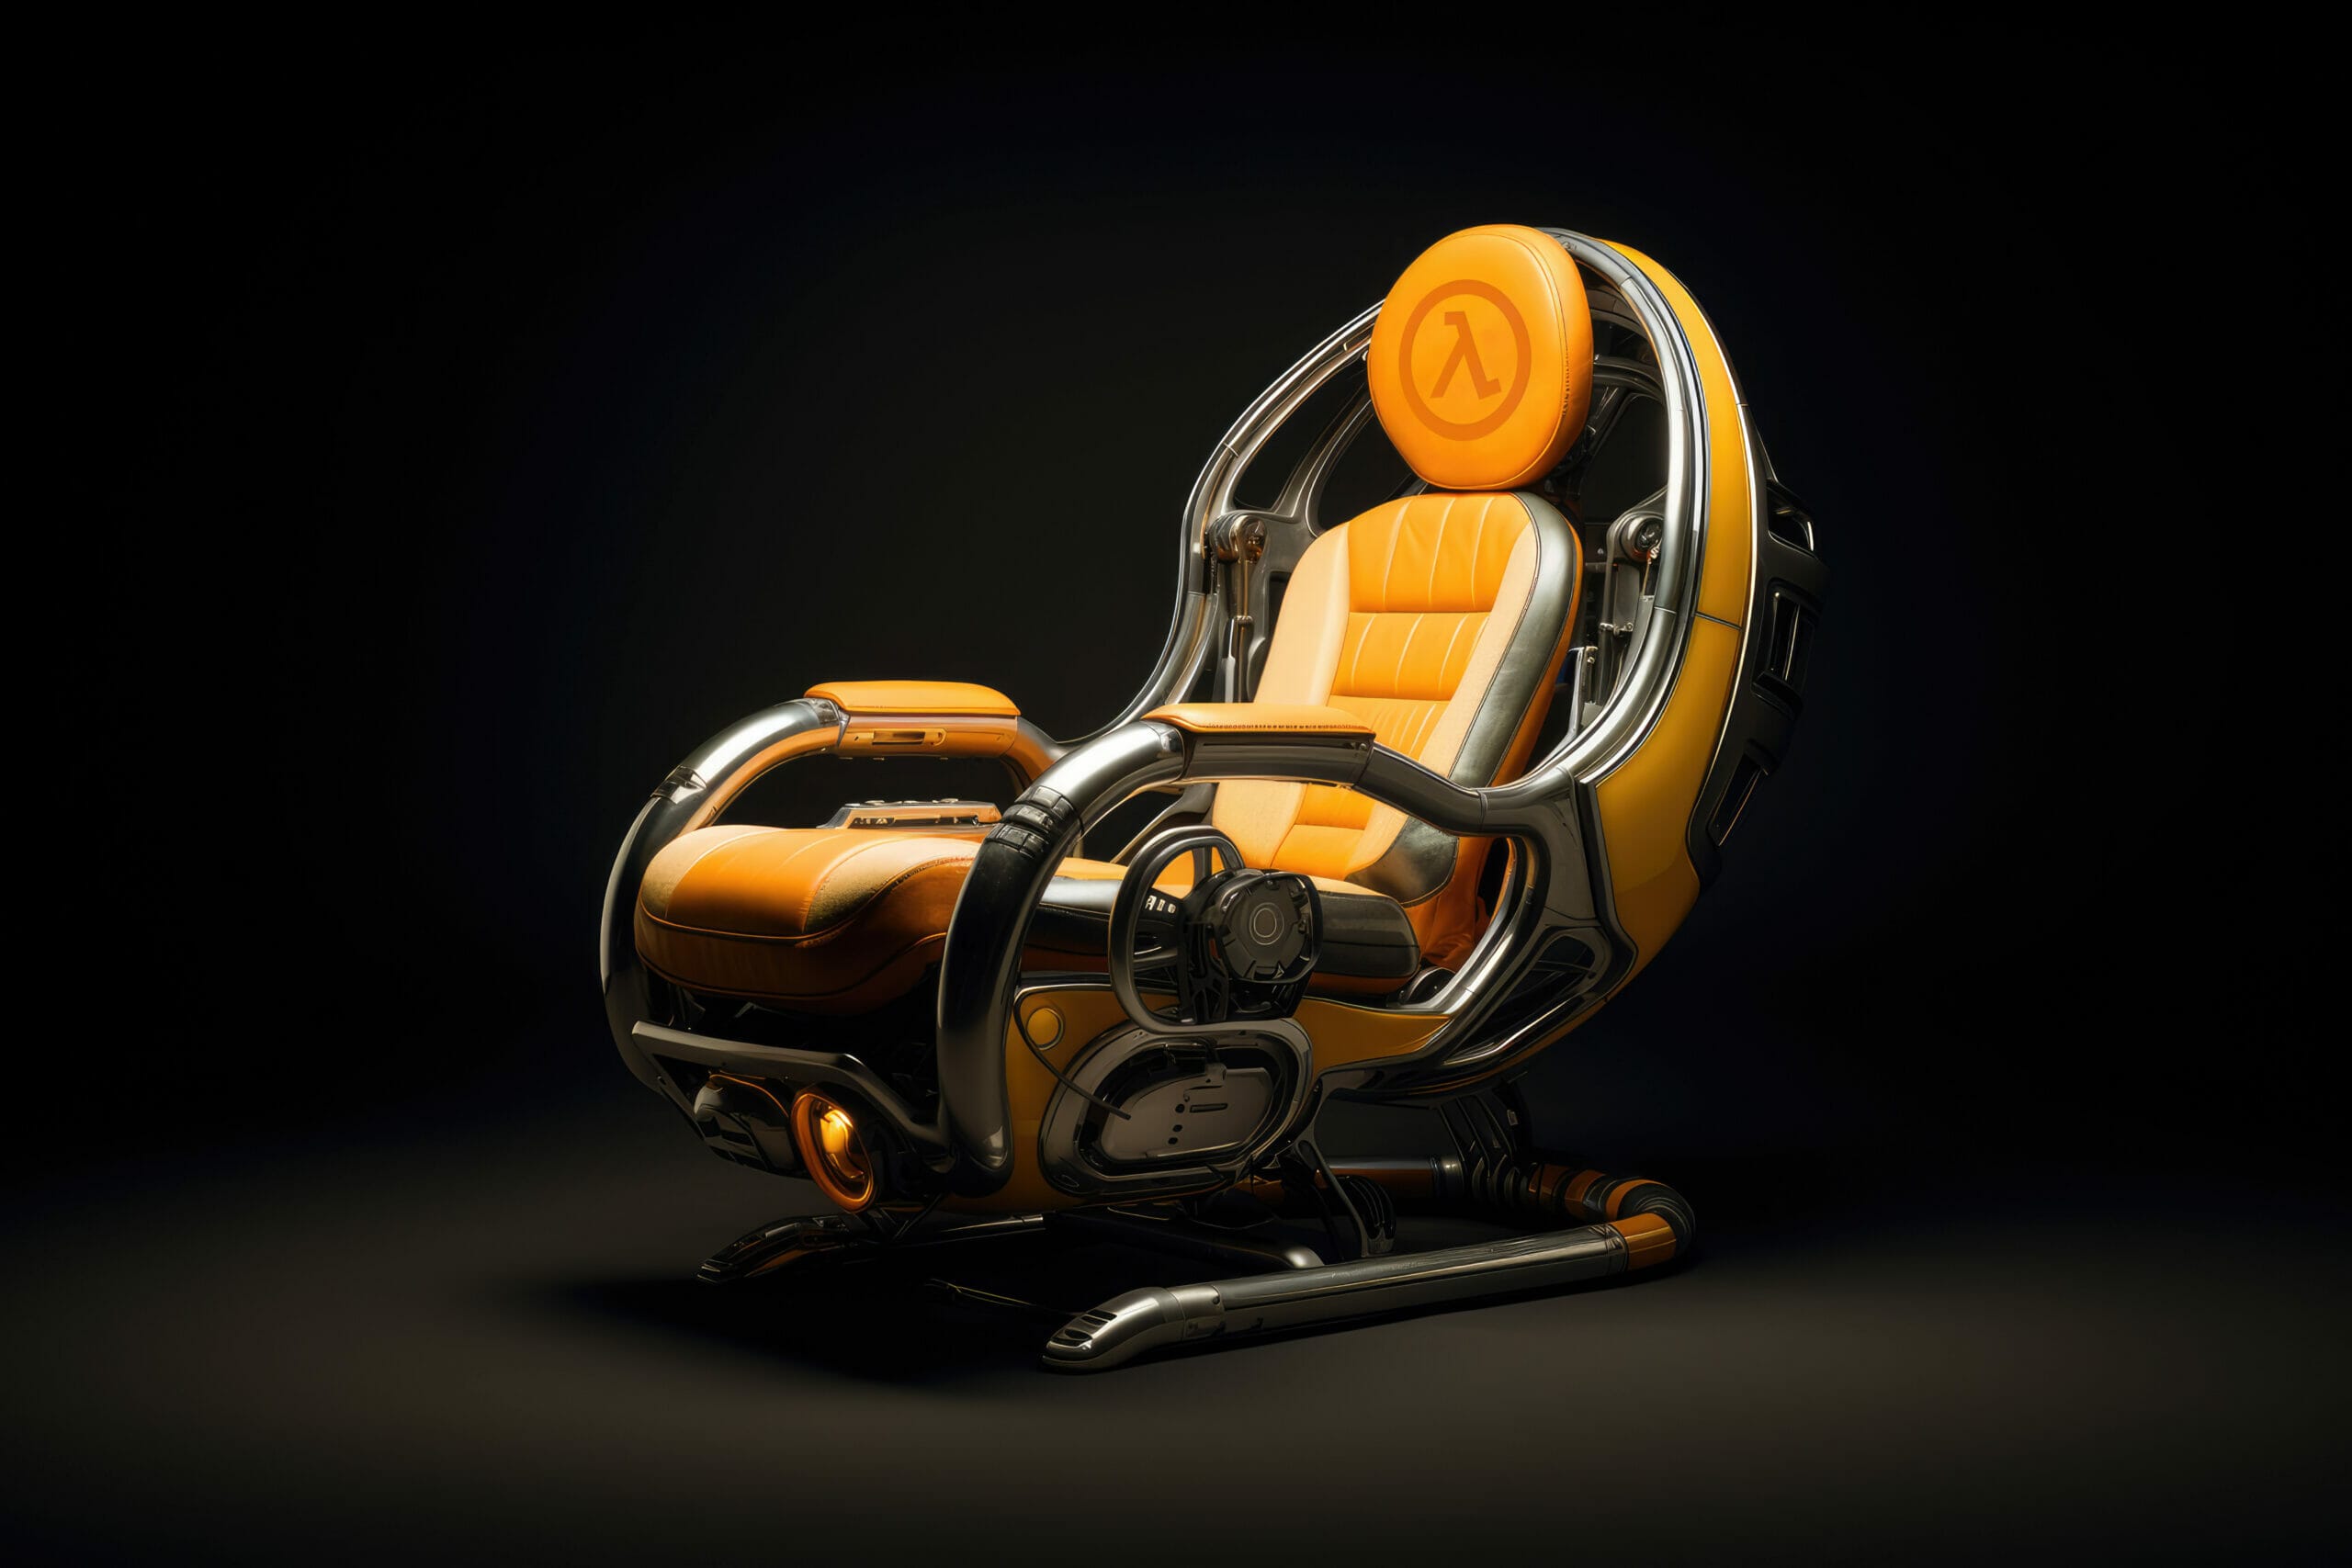 Half Life inspired gaming chair